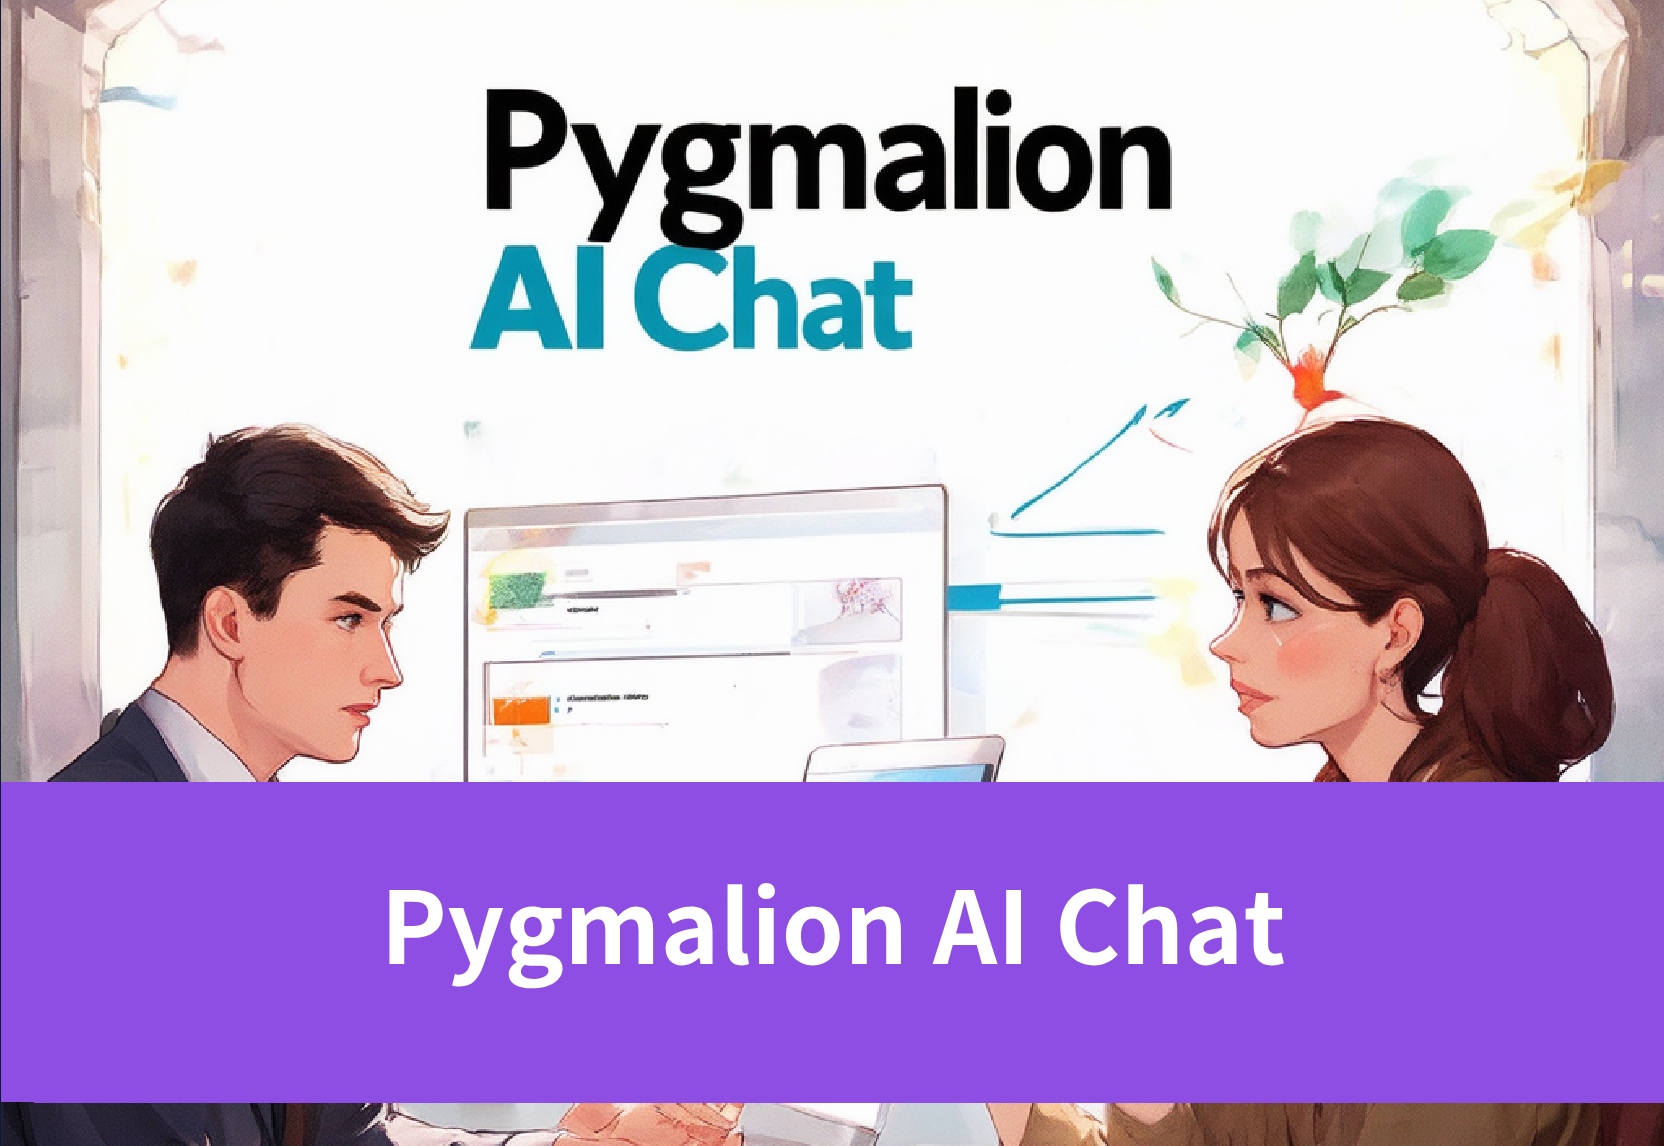 An In-Depth Look at Pygmalion AI Chat